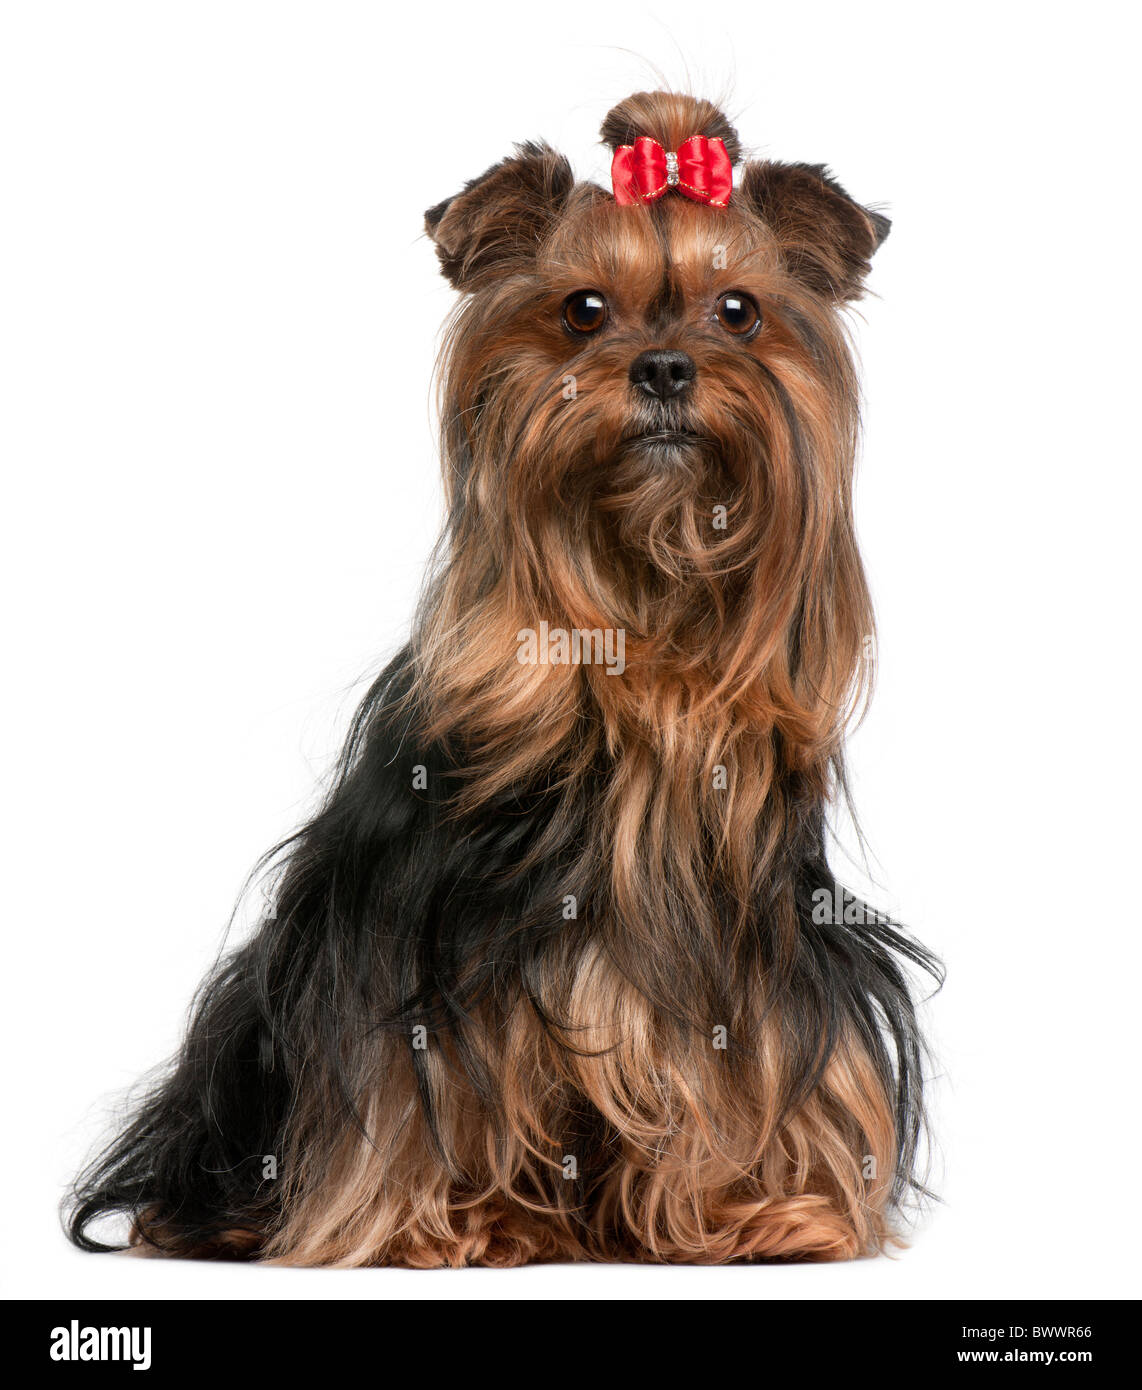 Yorkshire Terrier wearing red bow, 9 ans, in front of white background Banque D'Images